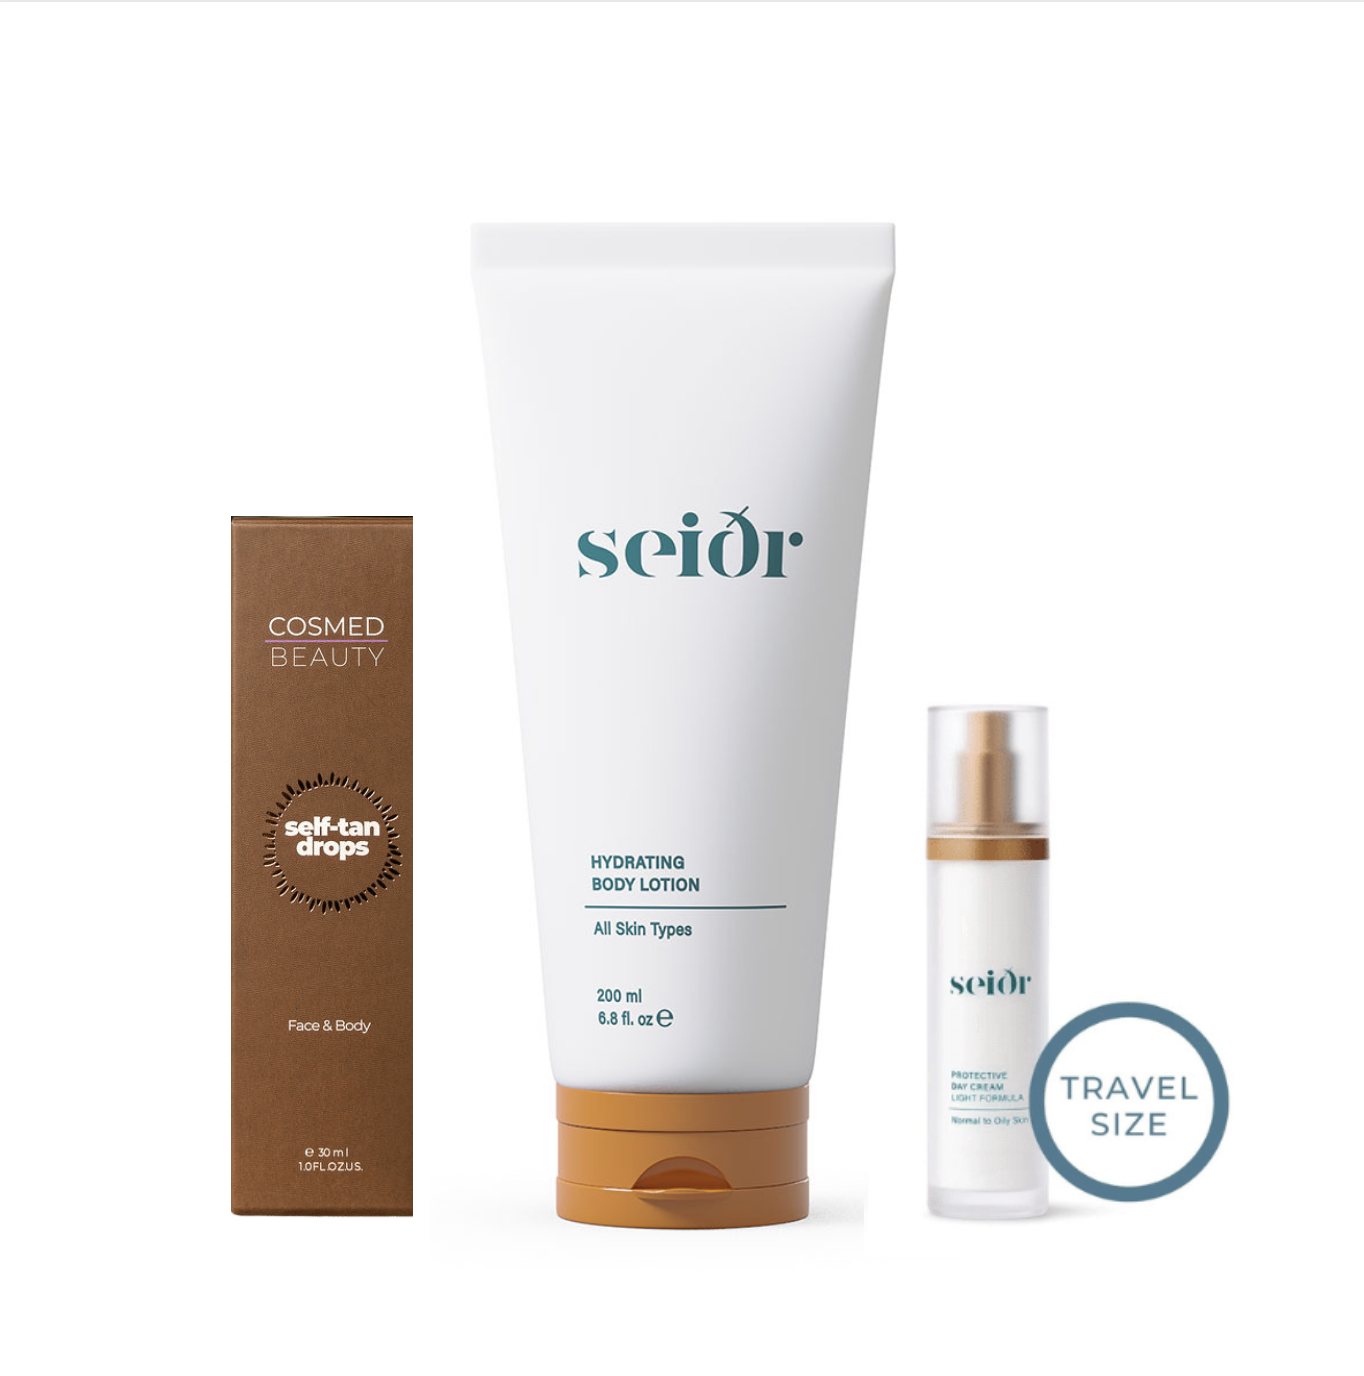 SELF-TAN DROPS + HYDRATING BODY LOTION + TRAVEL SIZE PROTECTIVE DAY CREAM LIGHT